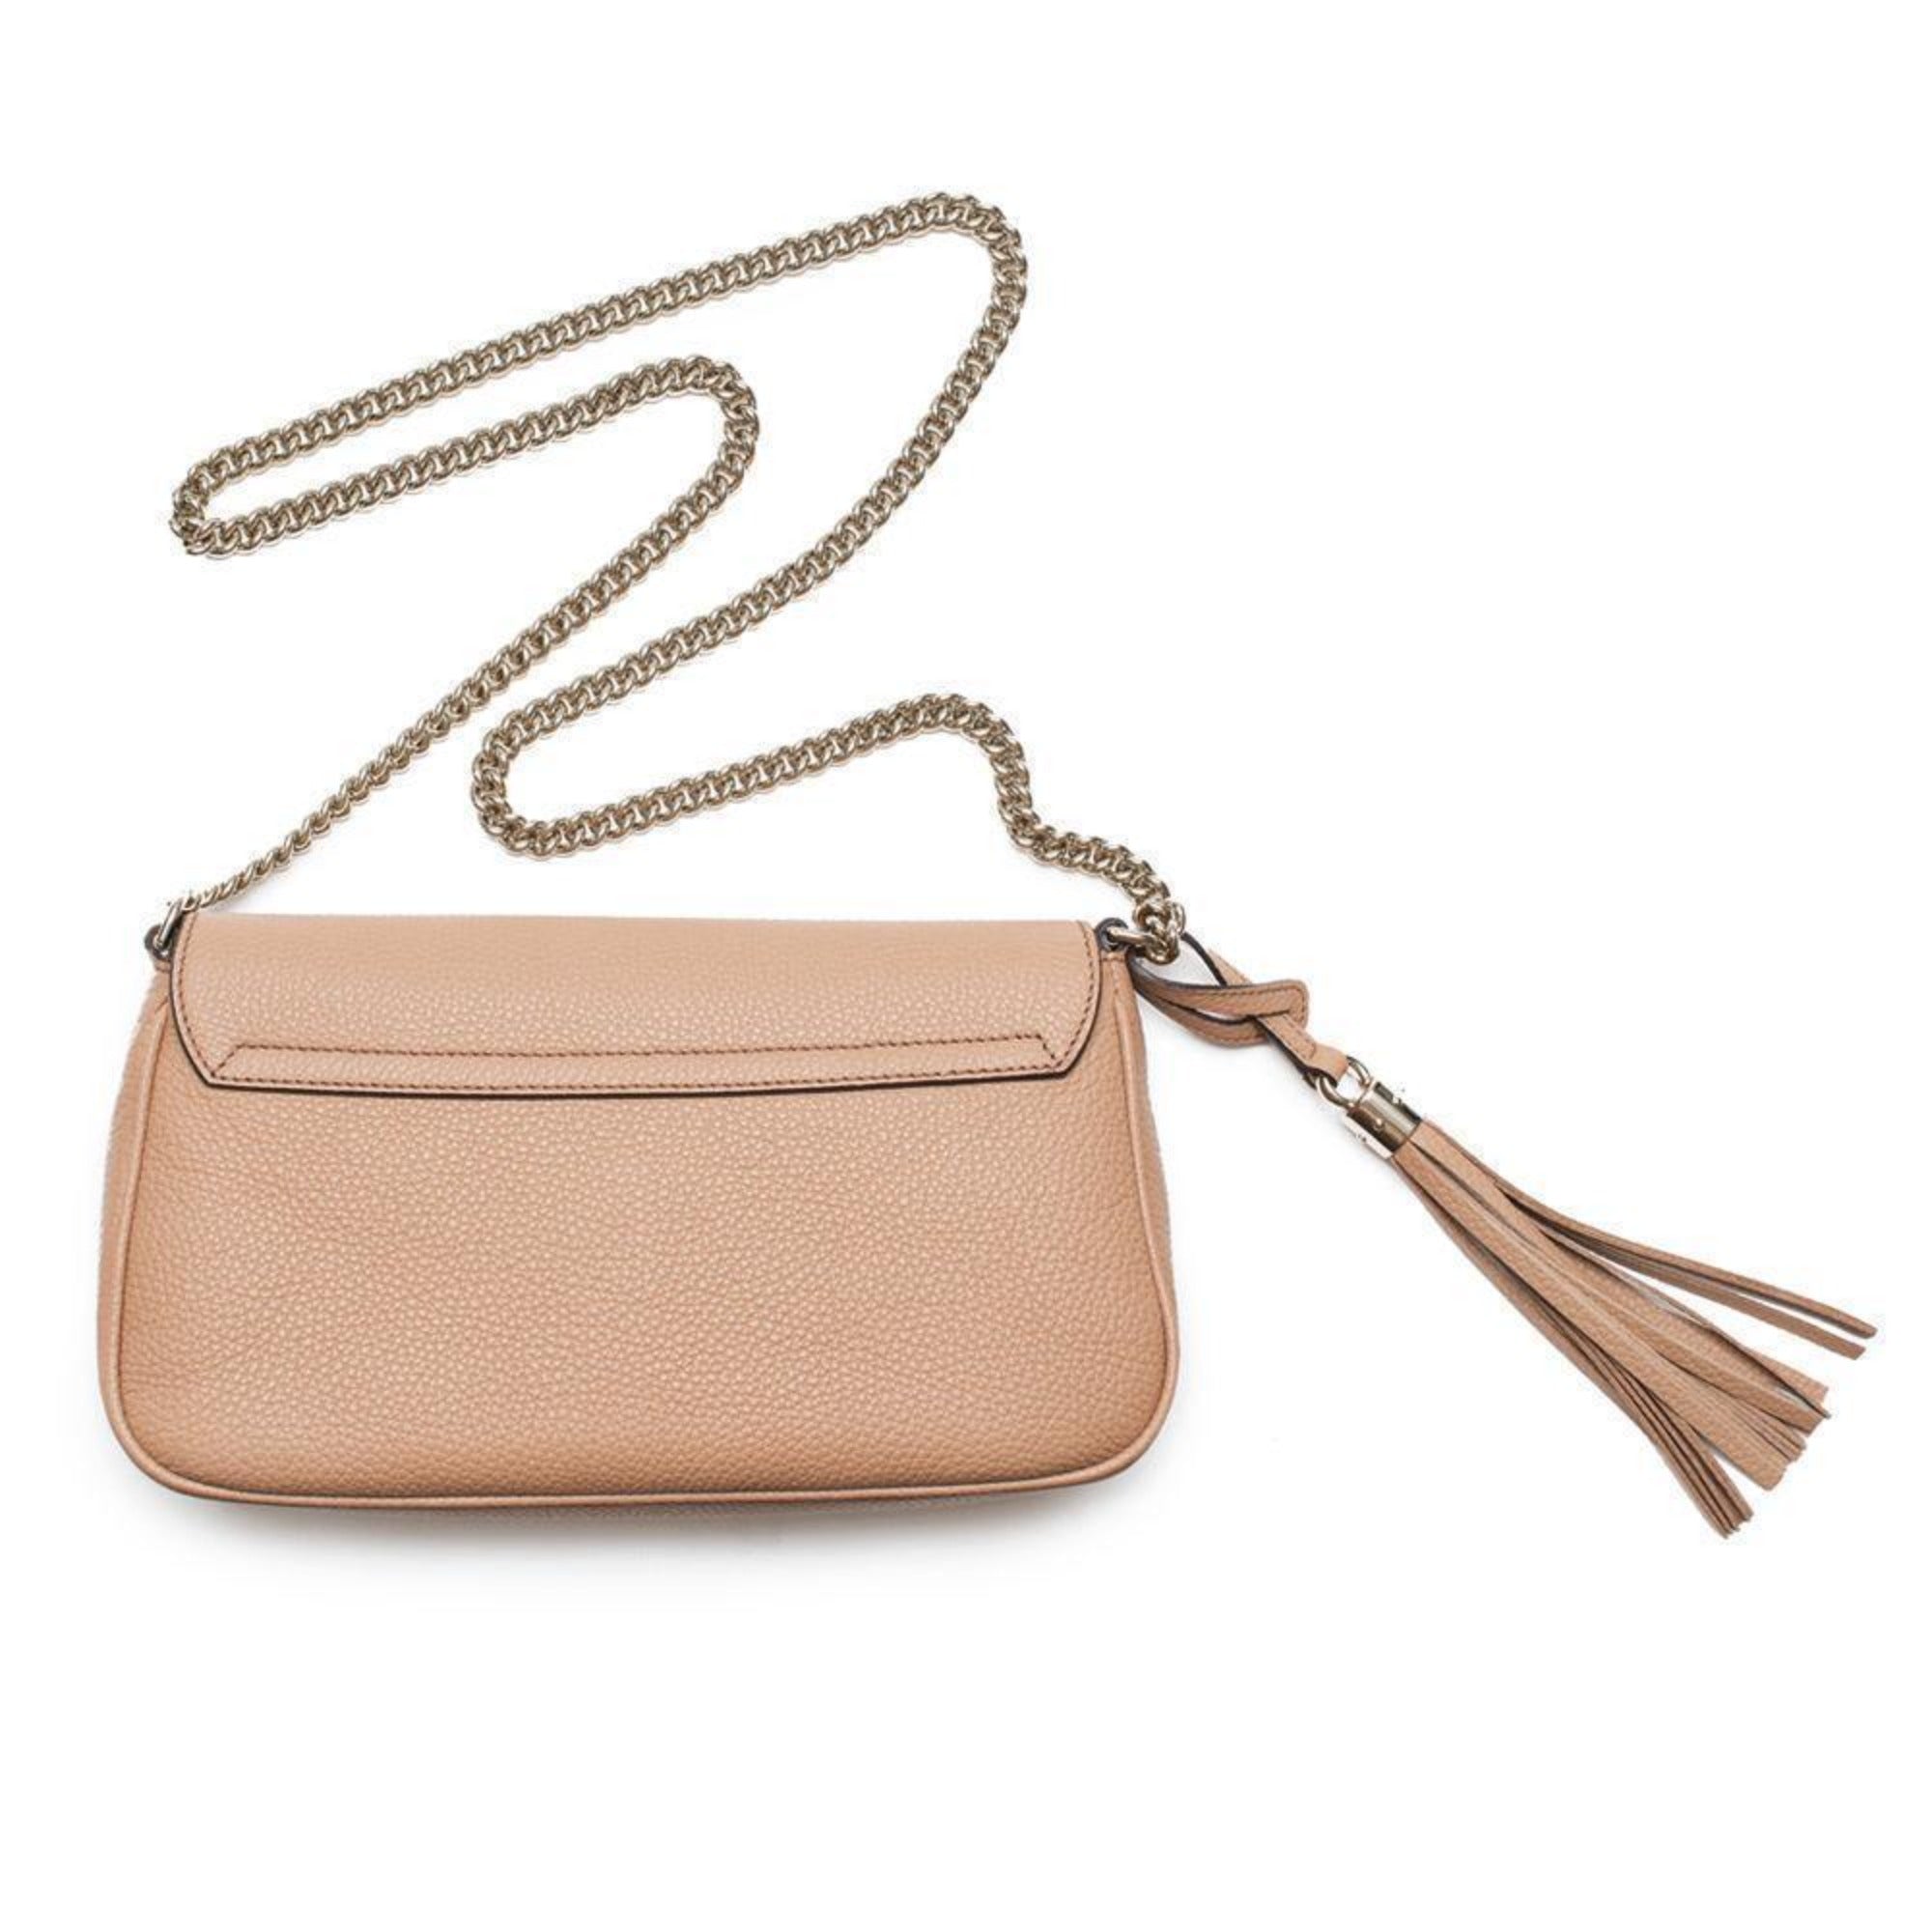 Gucci Soho Disco Camelia Beige GG Chain Cross Body 536224 at_Queen_Bee_of_Beverly_Hills